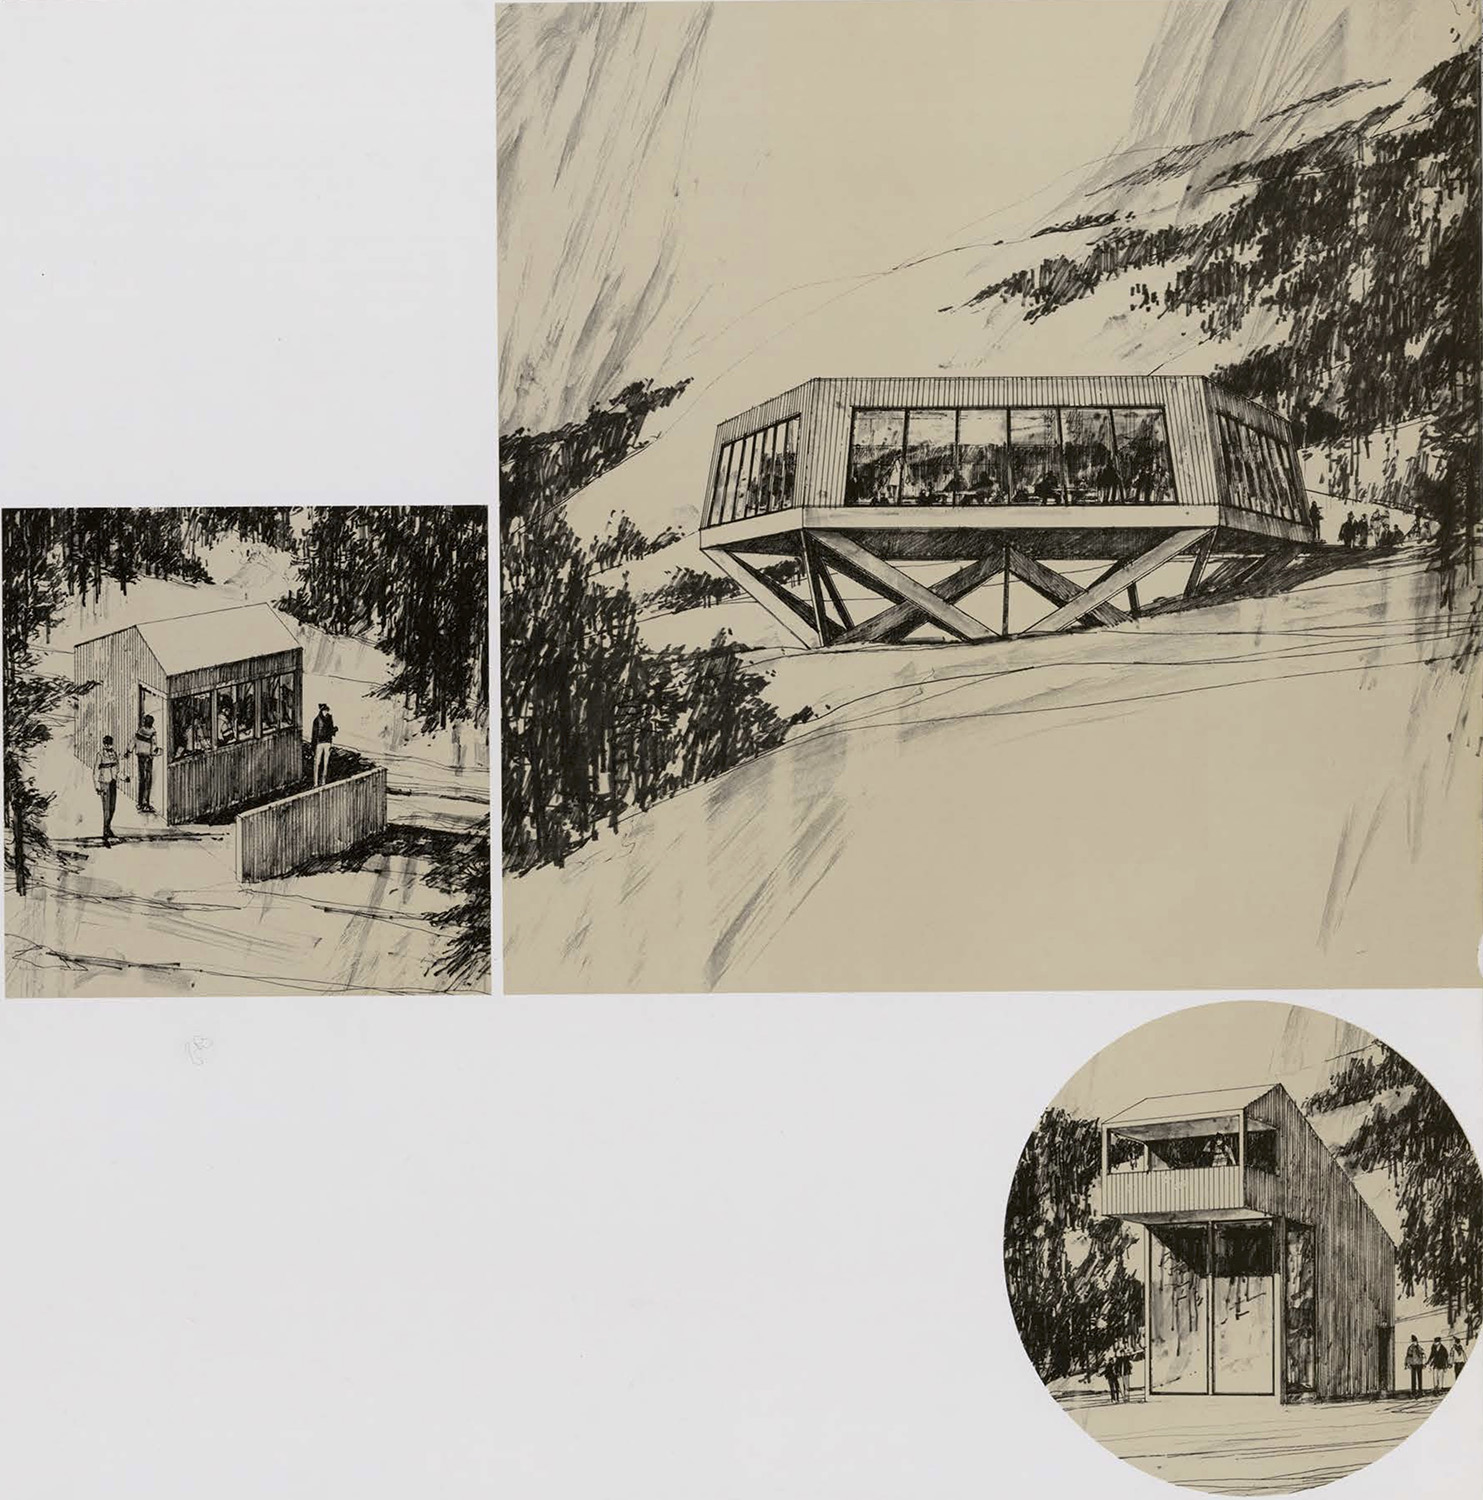 Drawings of the Alpine event facilities